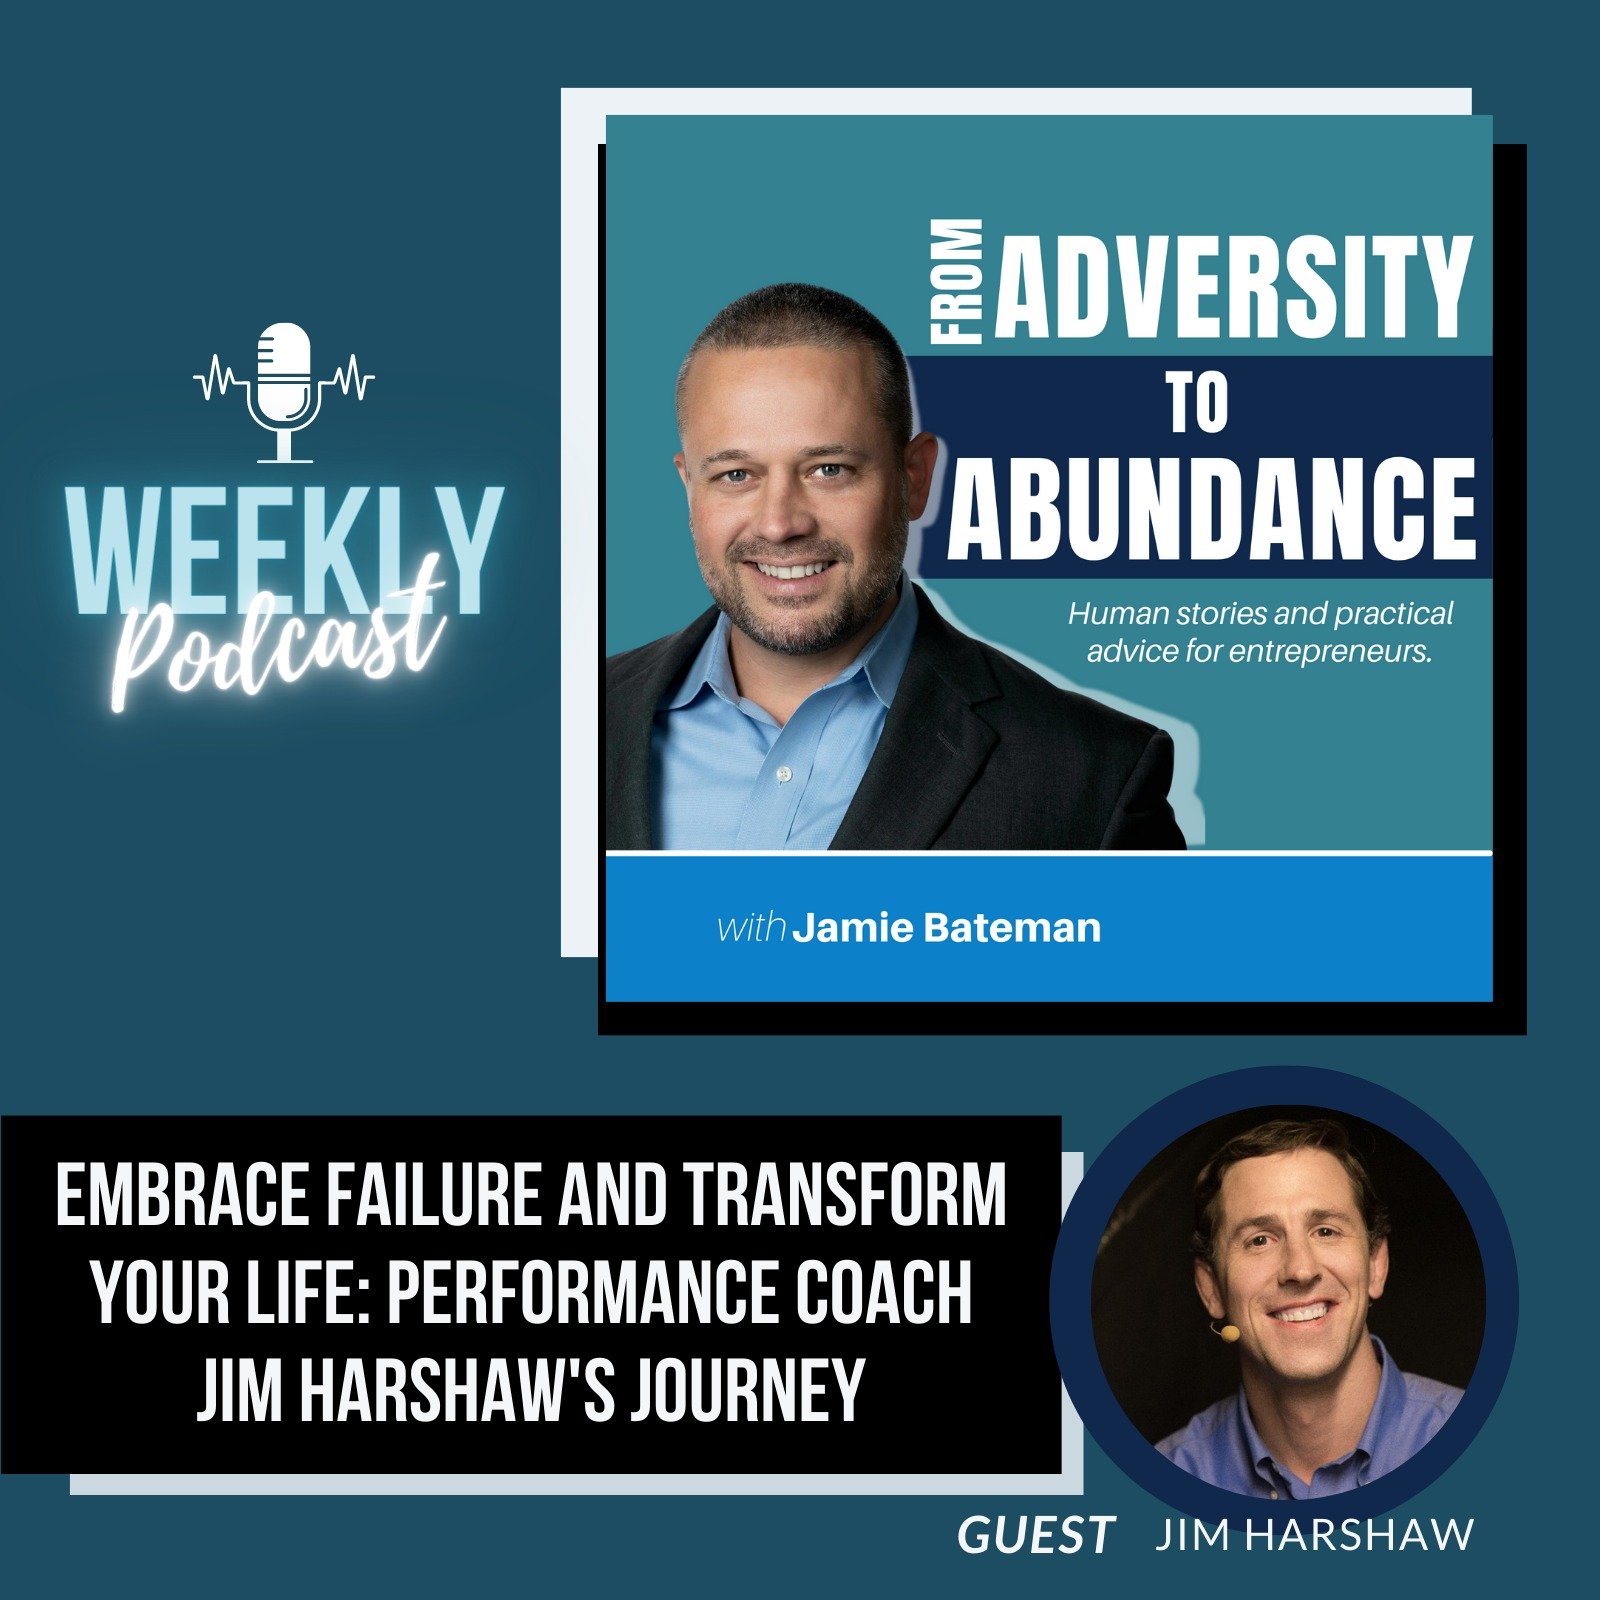 Embrace Failure and Transform Your Life: Performance Coach Jim Harshaw's Journey